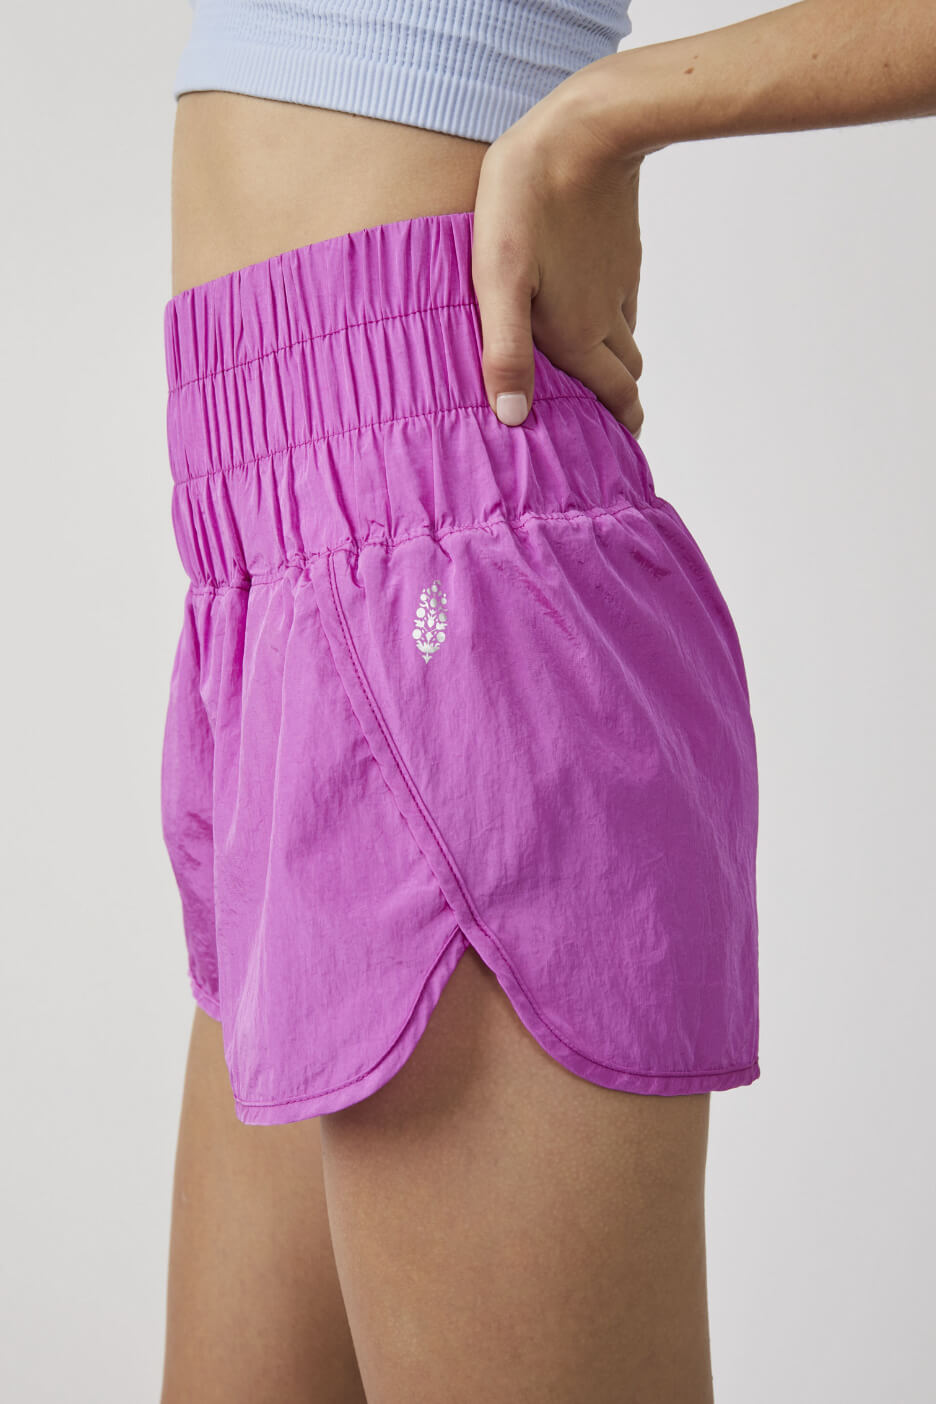 Free People the way home shorts in neon magenta